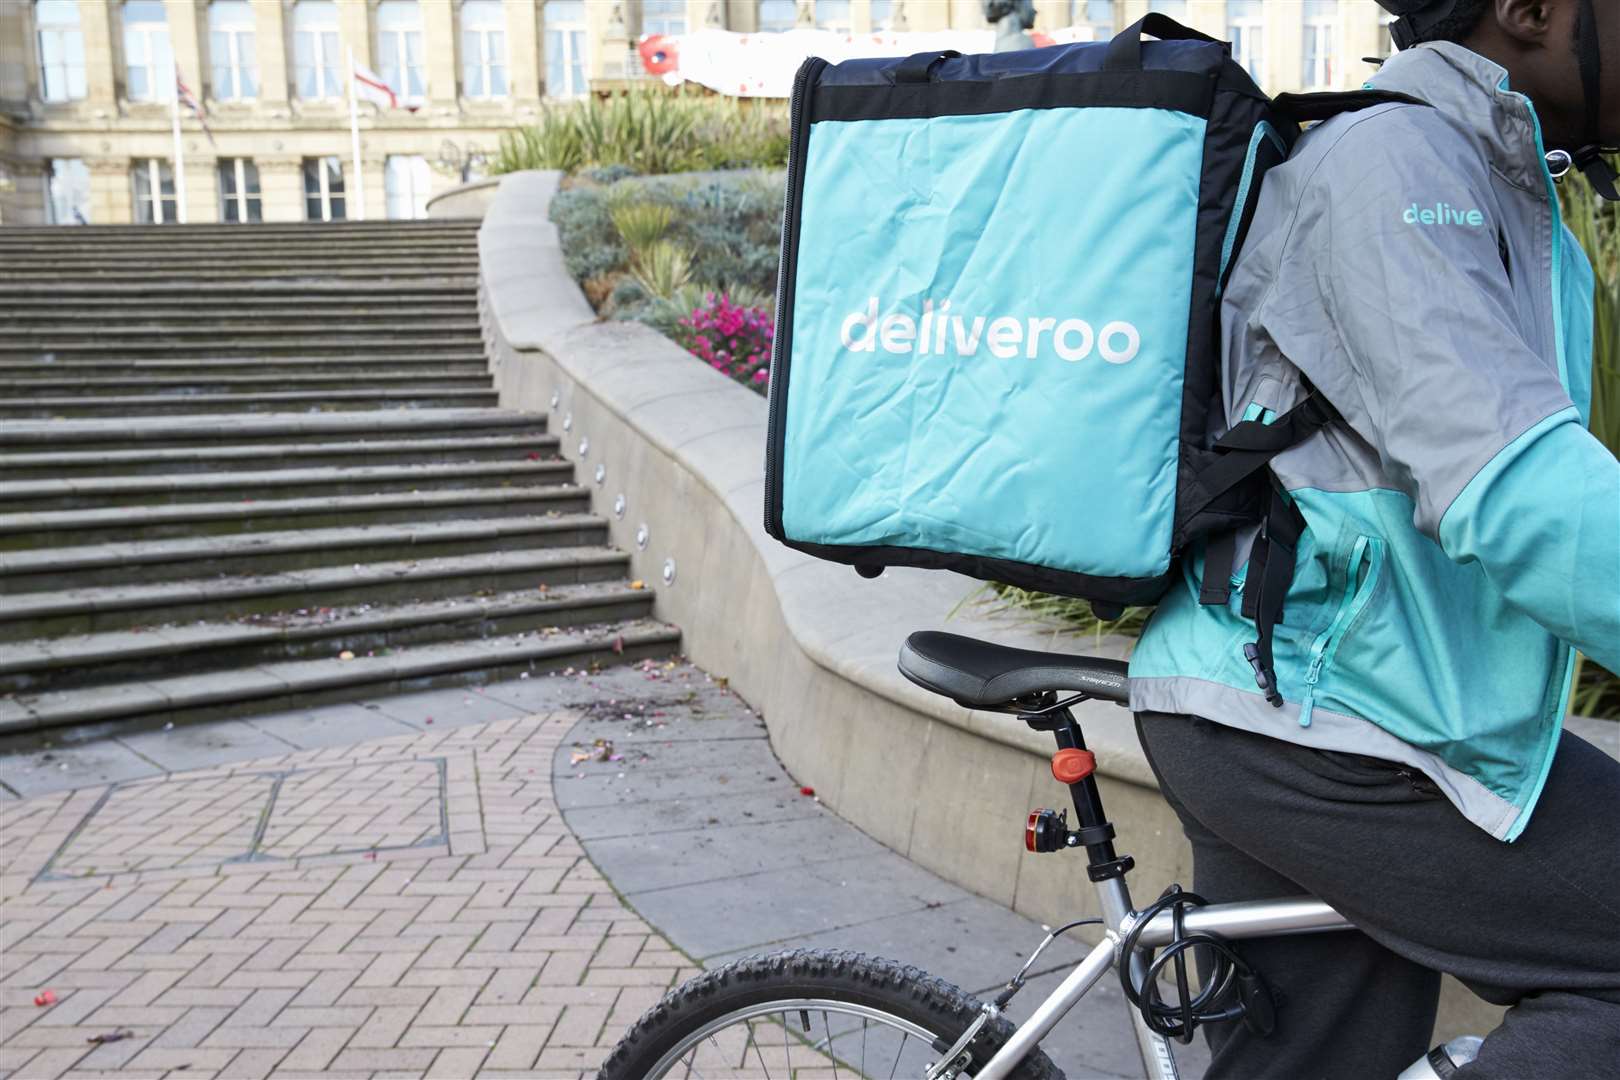 Deliveroo is expanding in Kent with new riders wanted in Margate